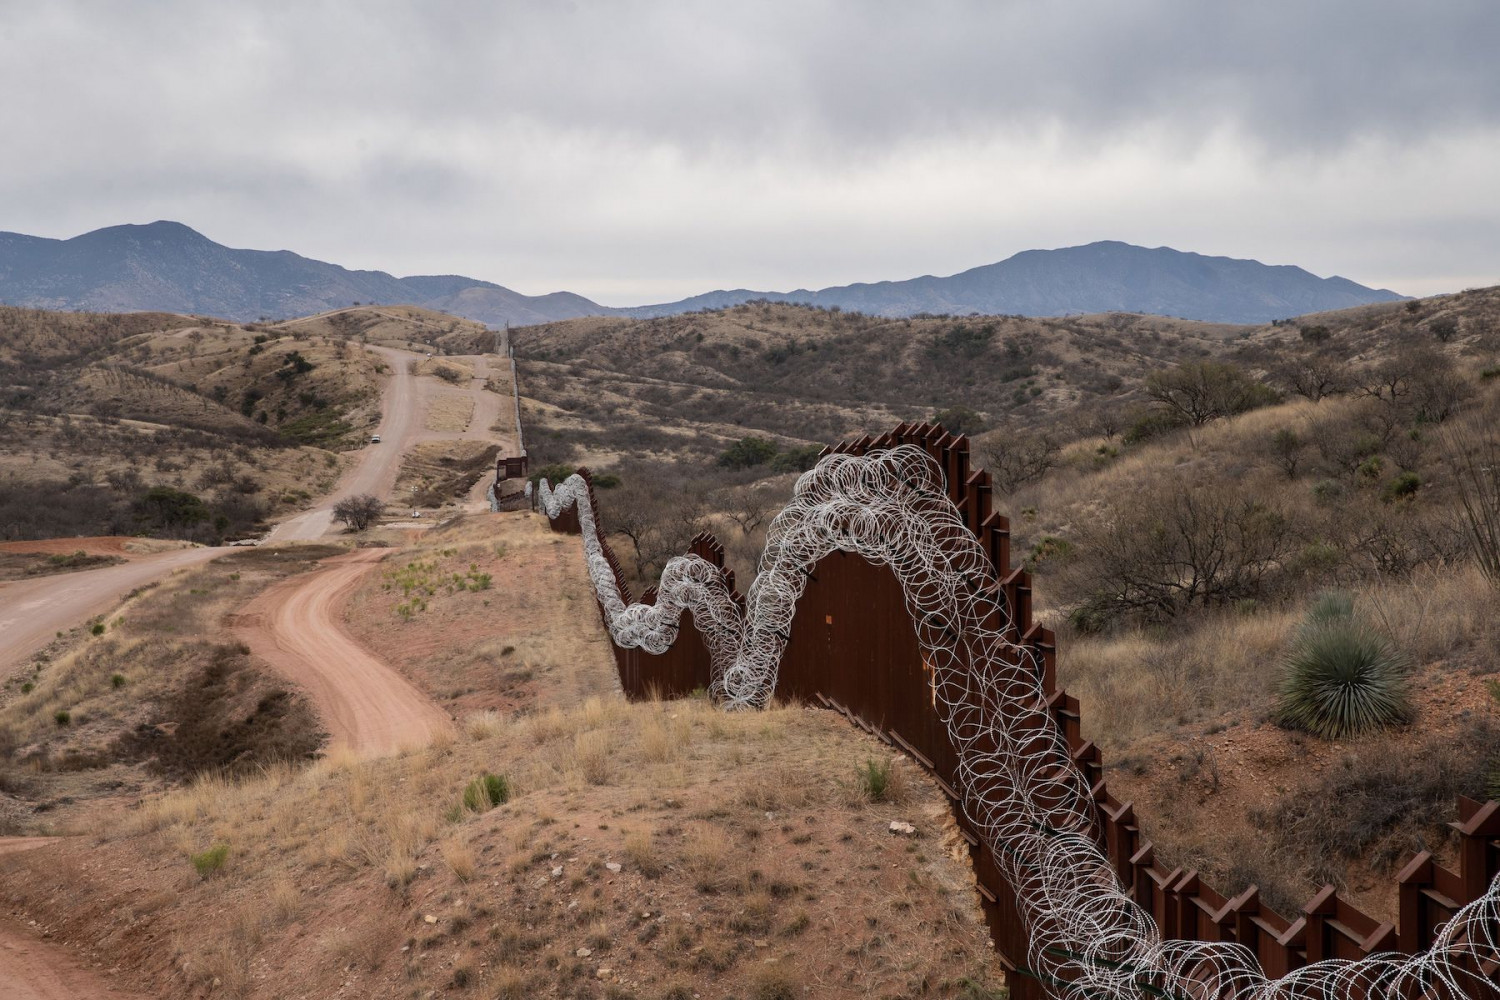 Arizona Governor Issues Declaration of Emergency, to Deploy National Guard on Border